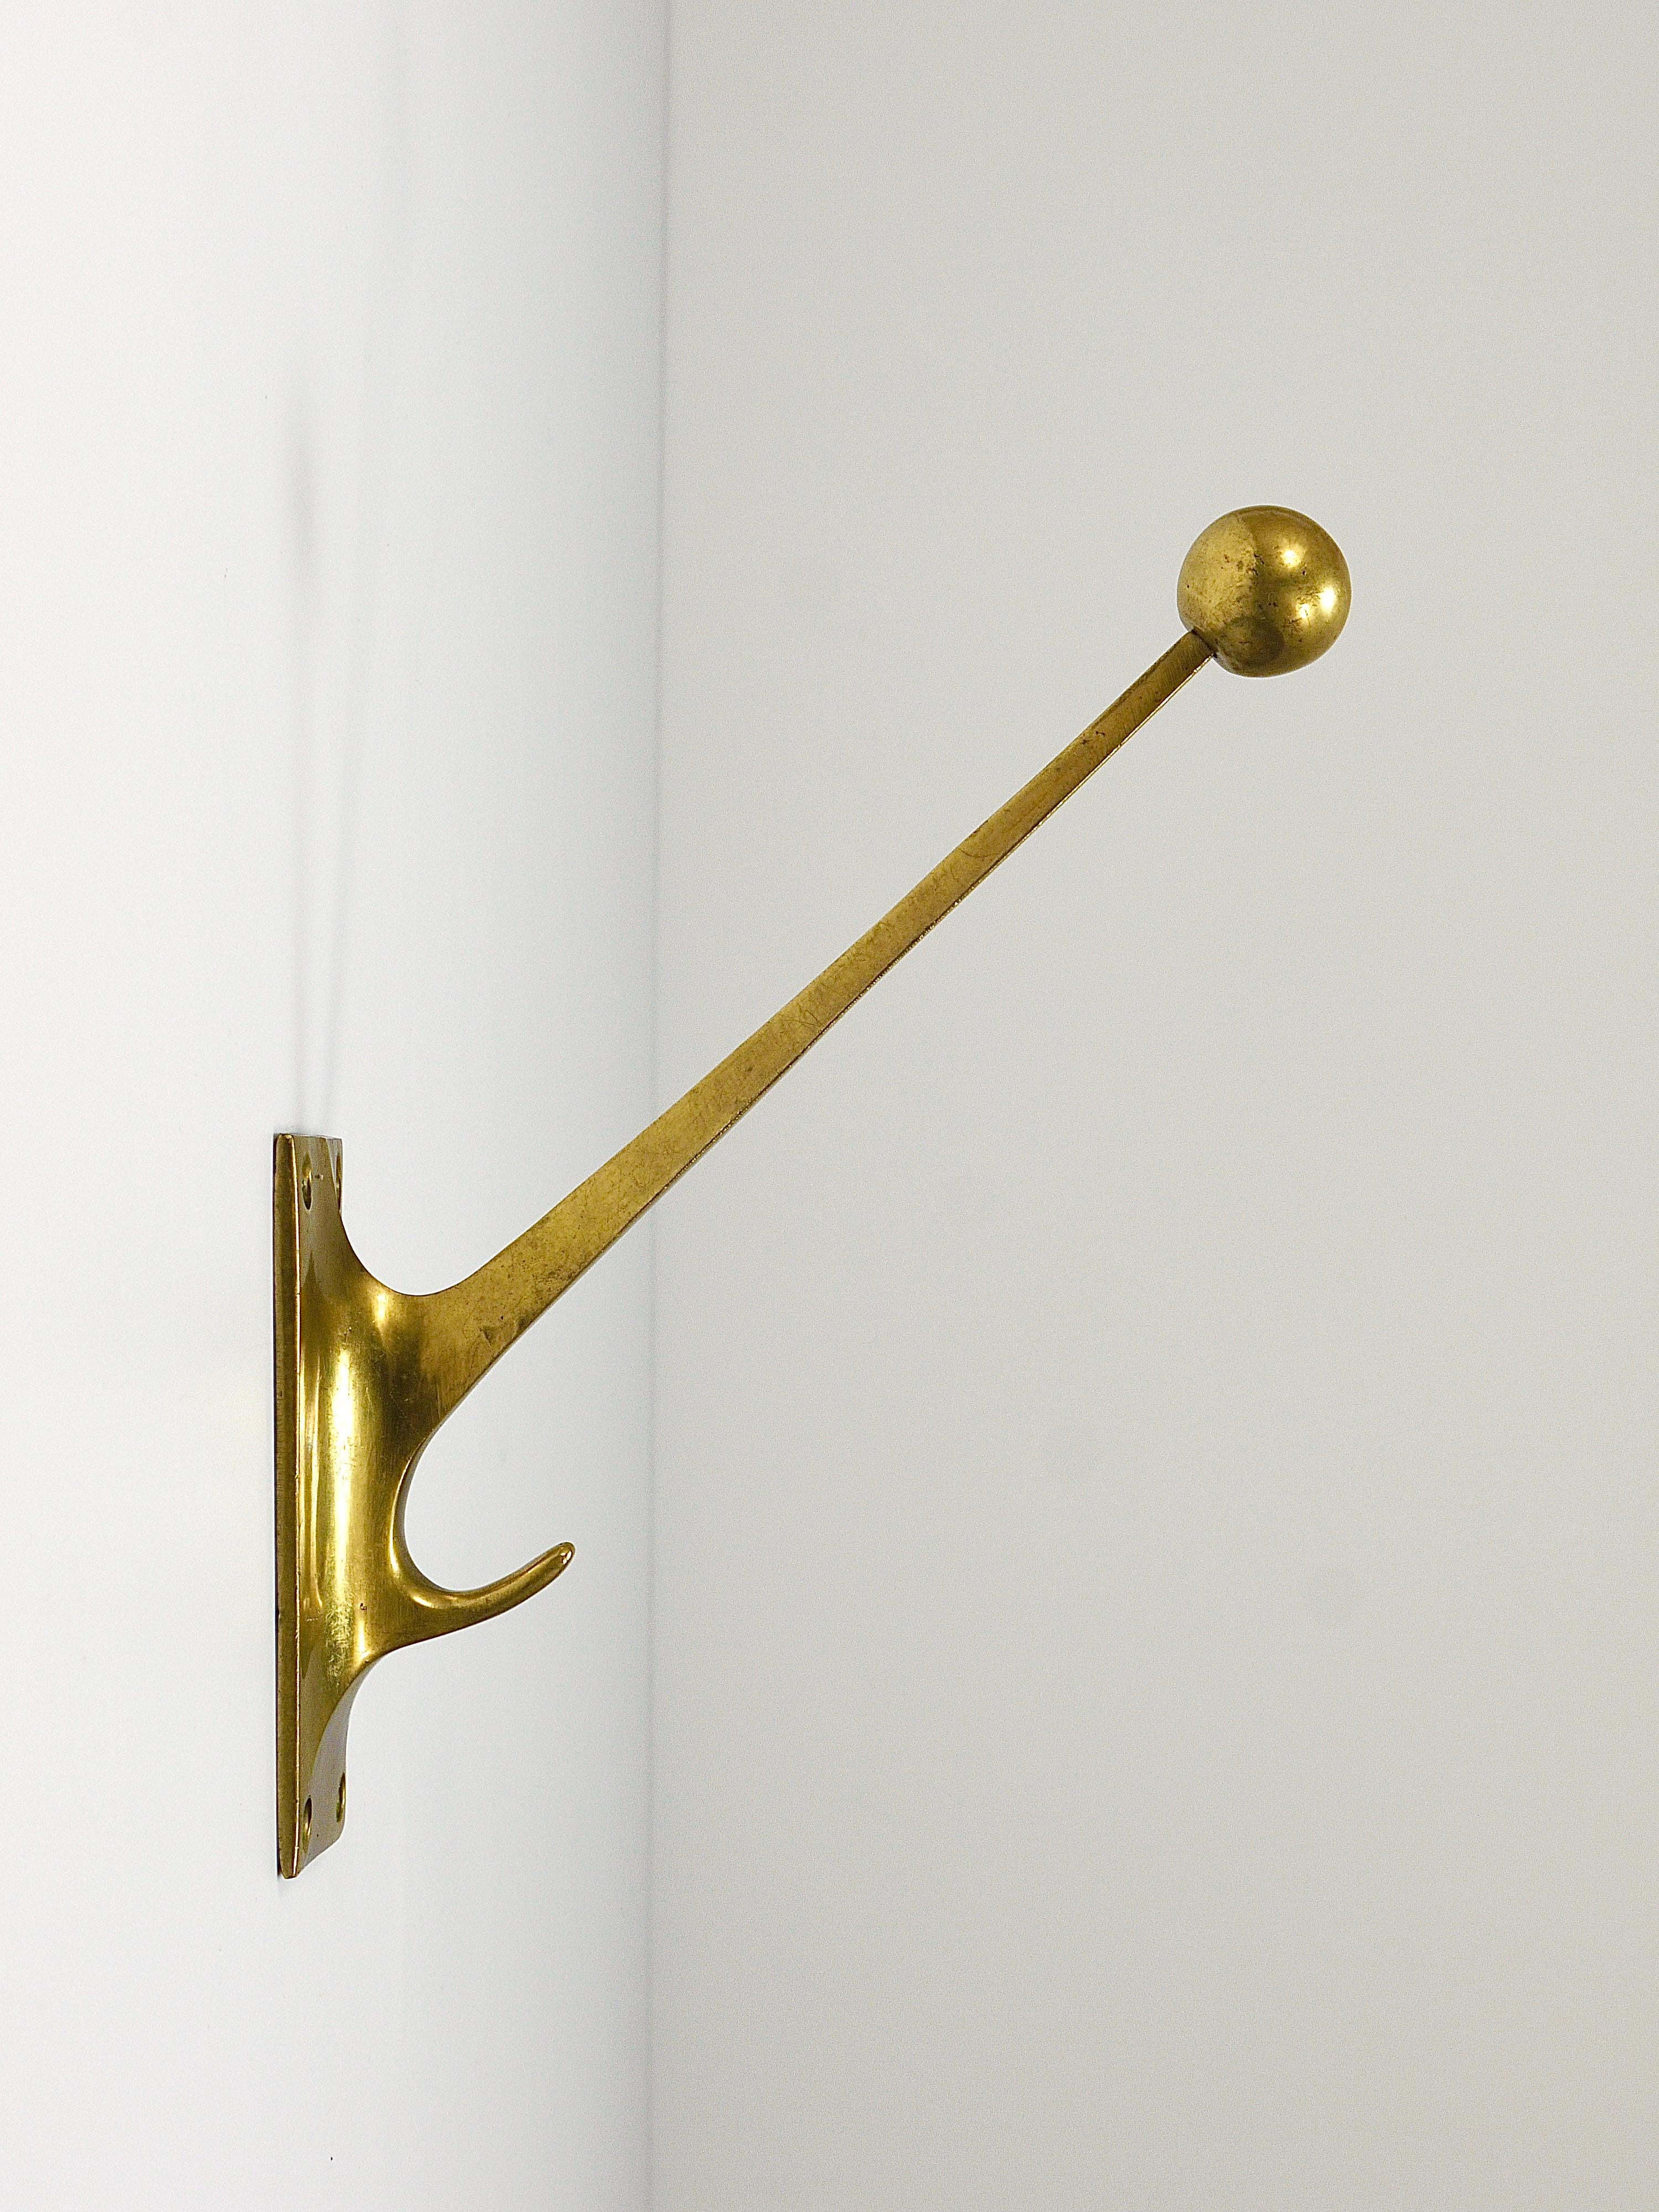 One beautiful, authentic and old, vintage Art Nouveau brass coat wall hook. These hooks were designed in 1909 by Adolf Loos for the store of the Viennese Gentleman’s Outfitter and Tailor Knize & Comp. In good condition with nice patina.